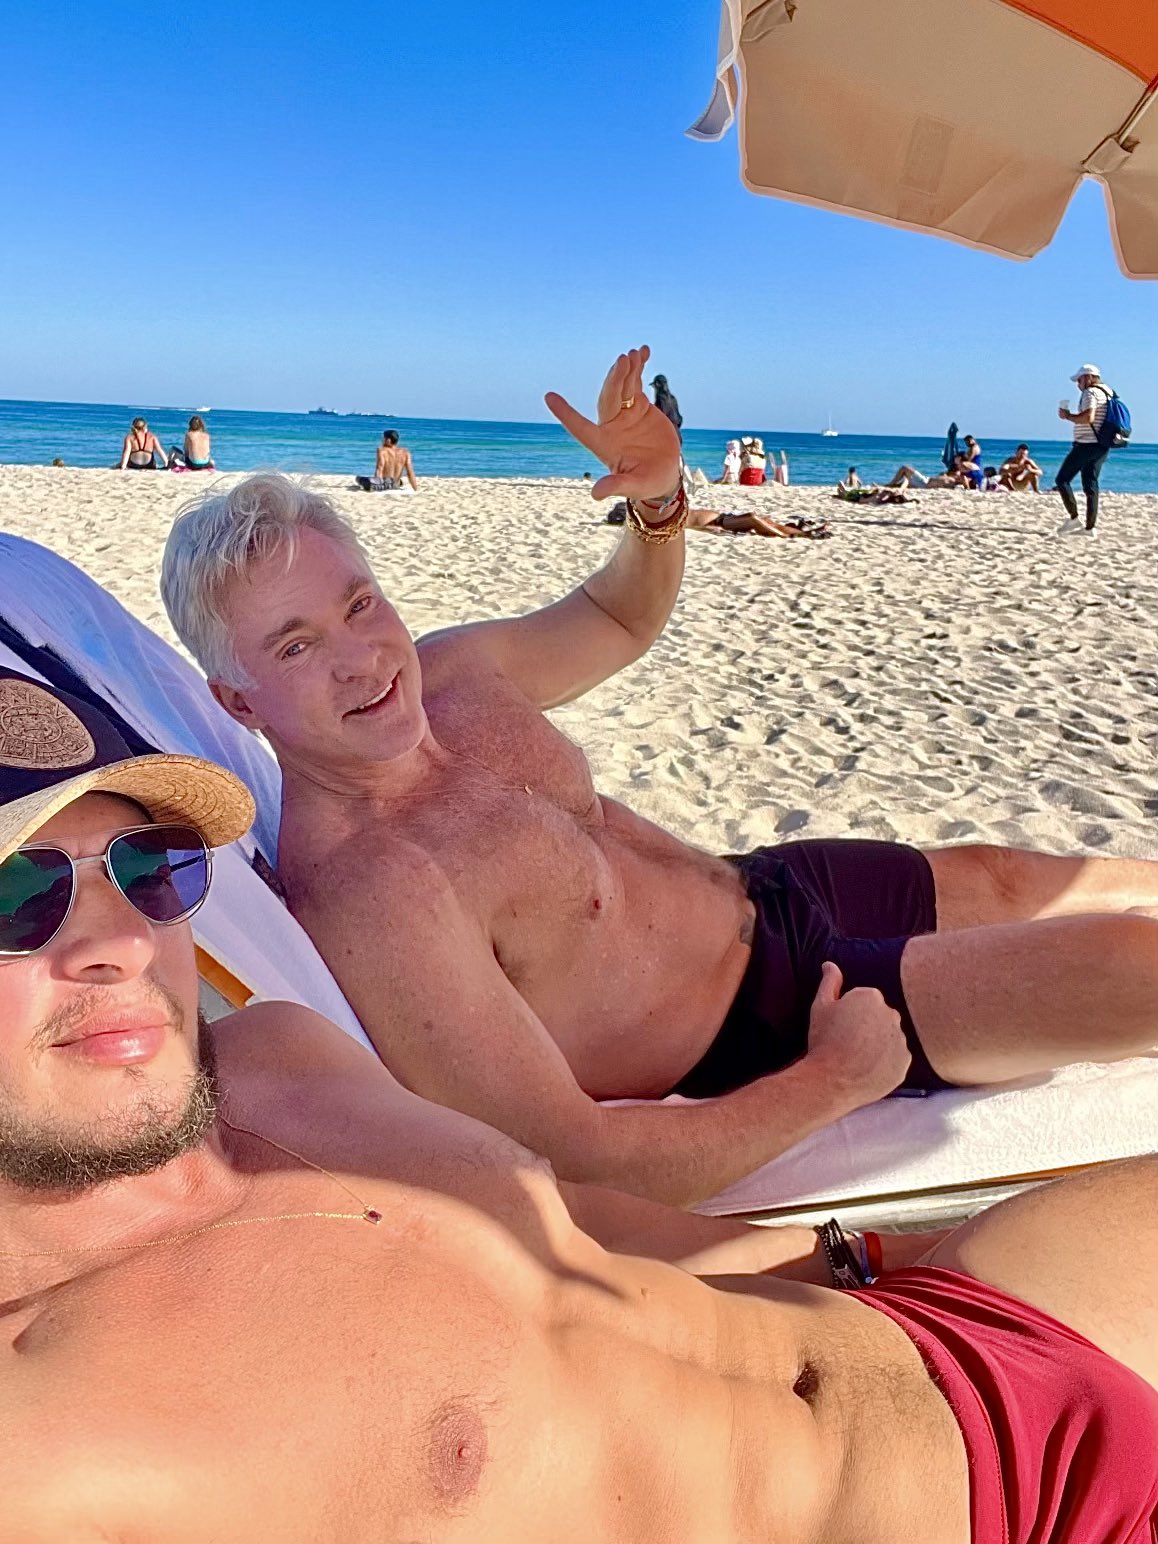 Earlier this month, he shared another beach selfie, that time from Brazil